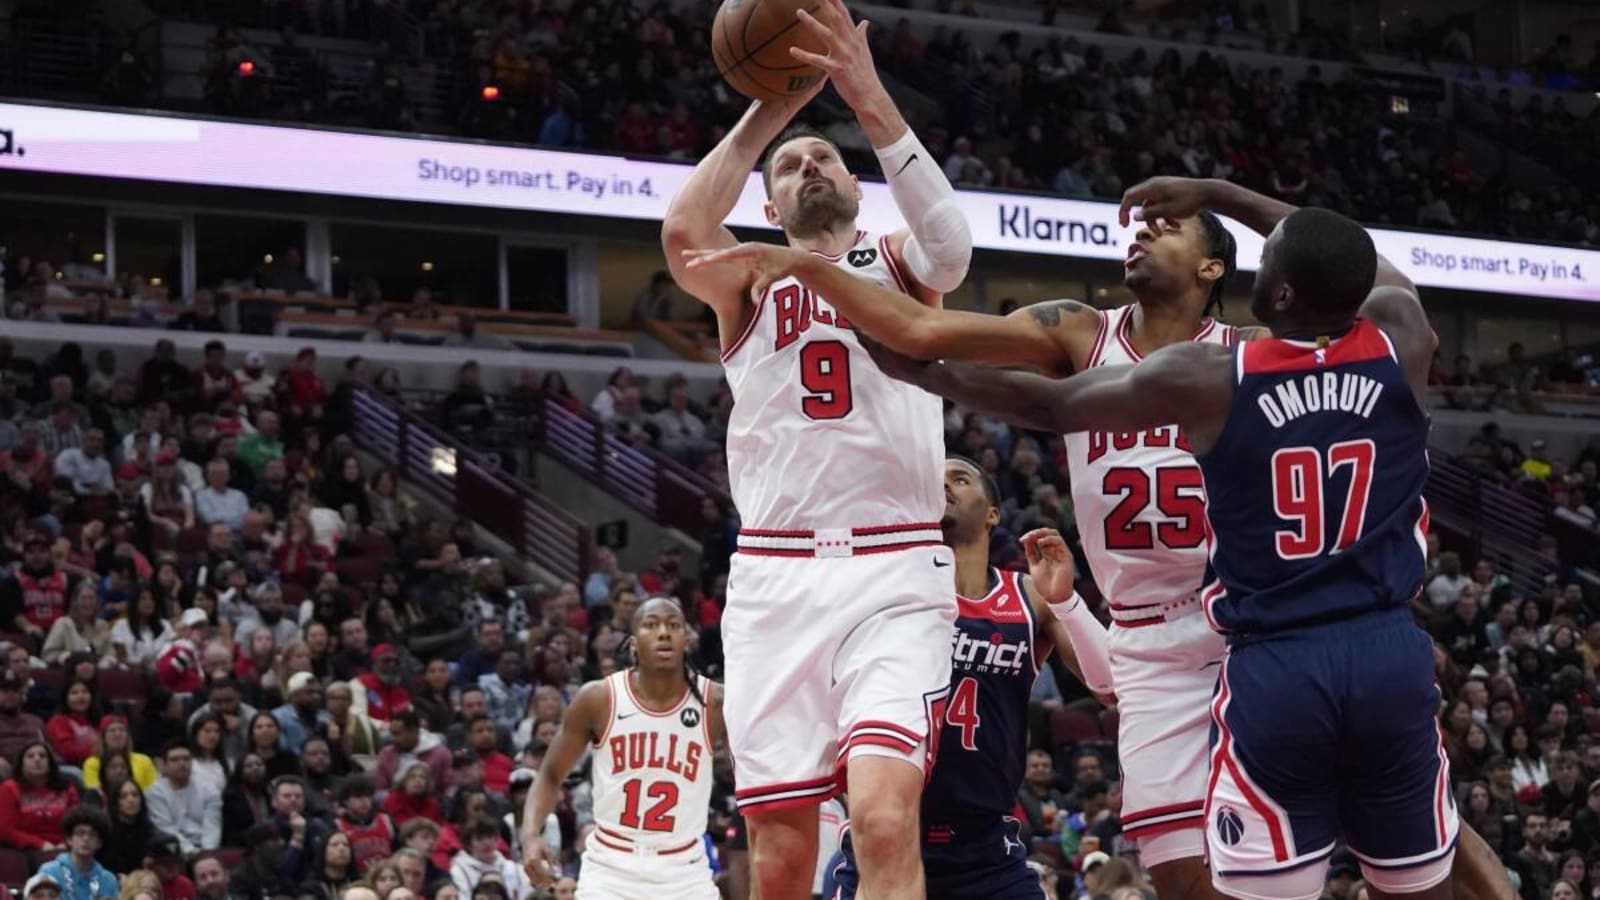 "We&#39;re not going to stop fighting to get there" - Nikola Vucevic on the Chicago Bulls trying to reach the .500 mark